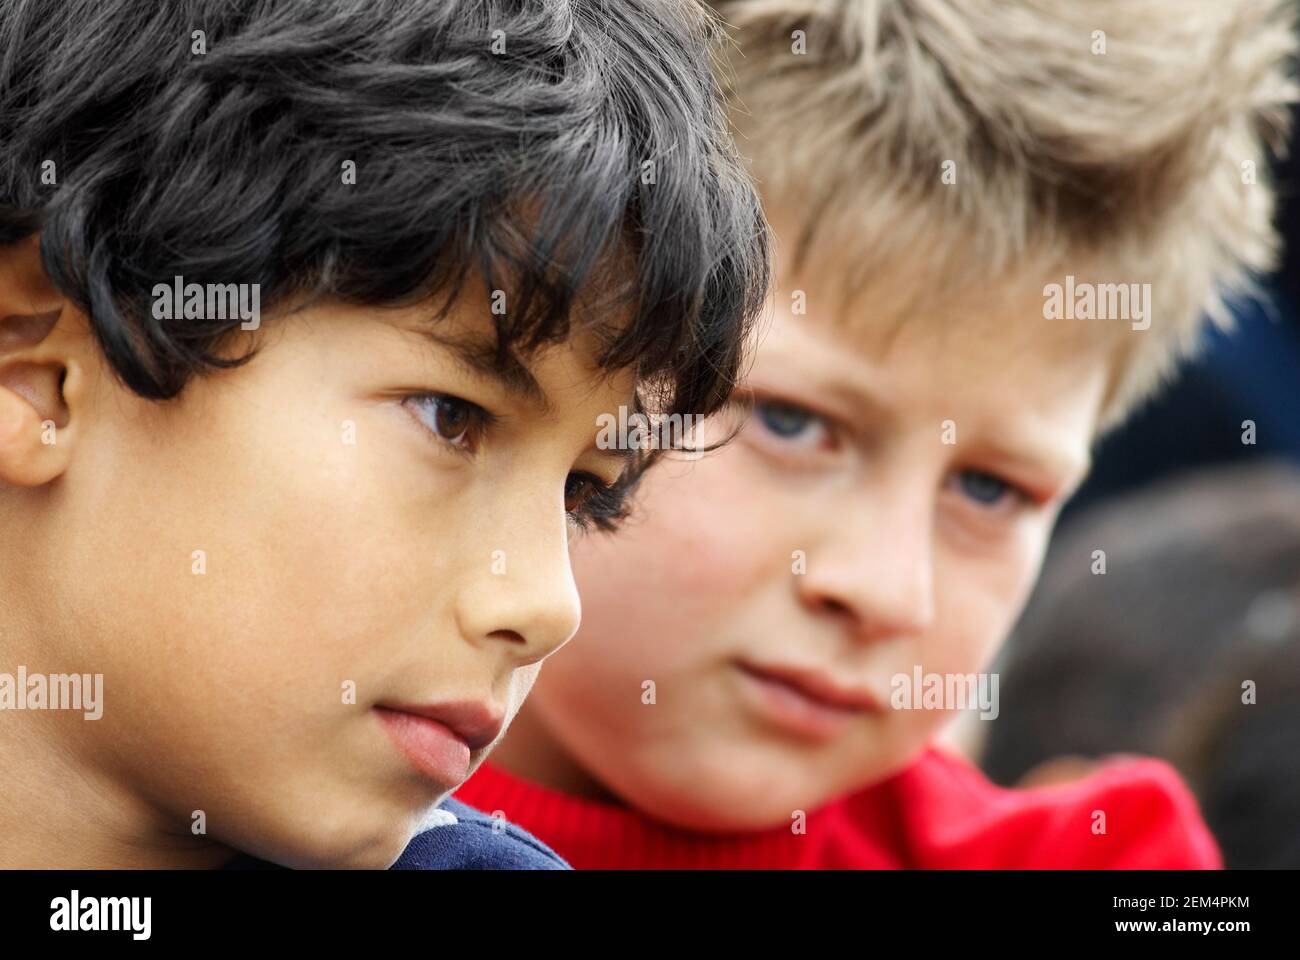 Close-up of two boys looking serious Stock Photo